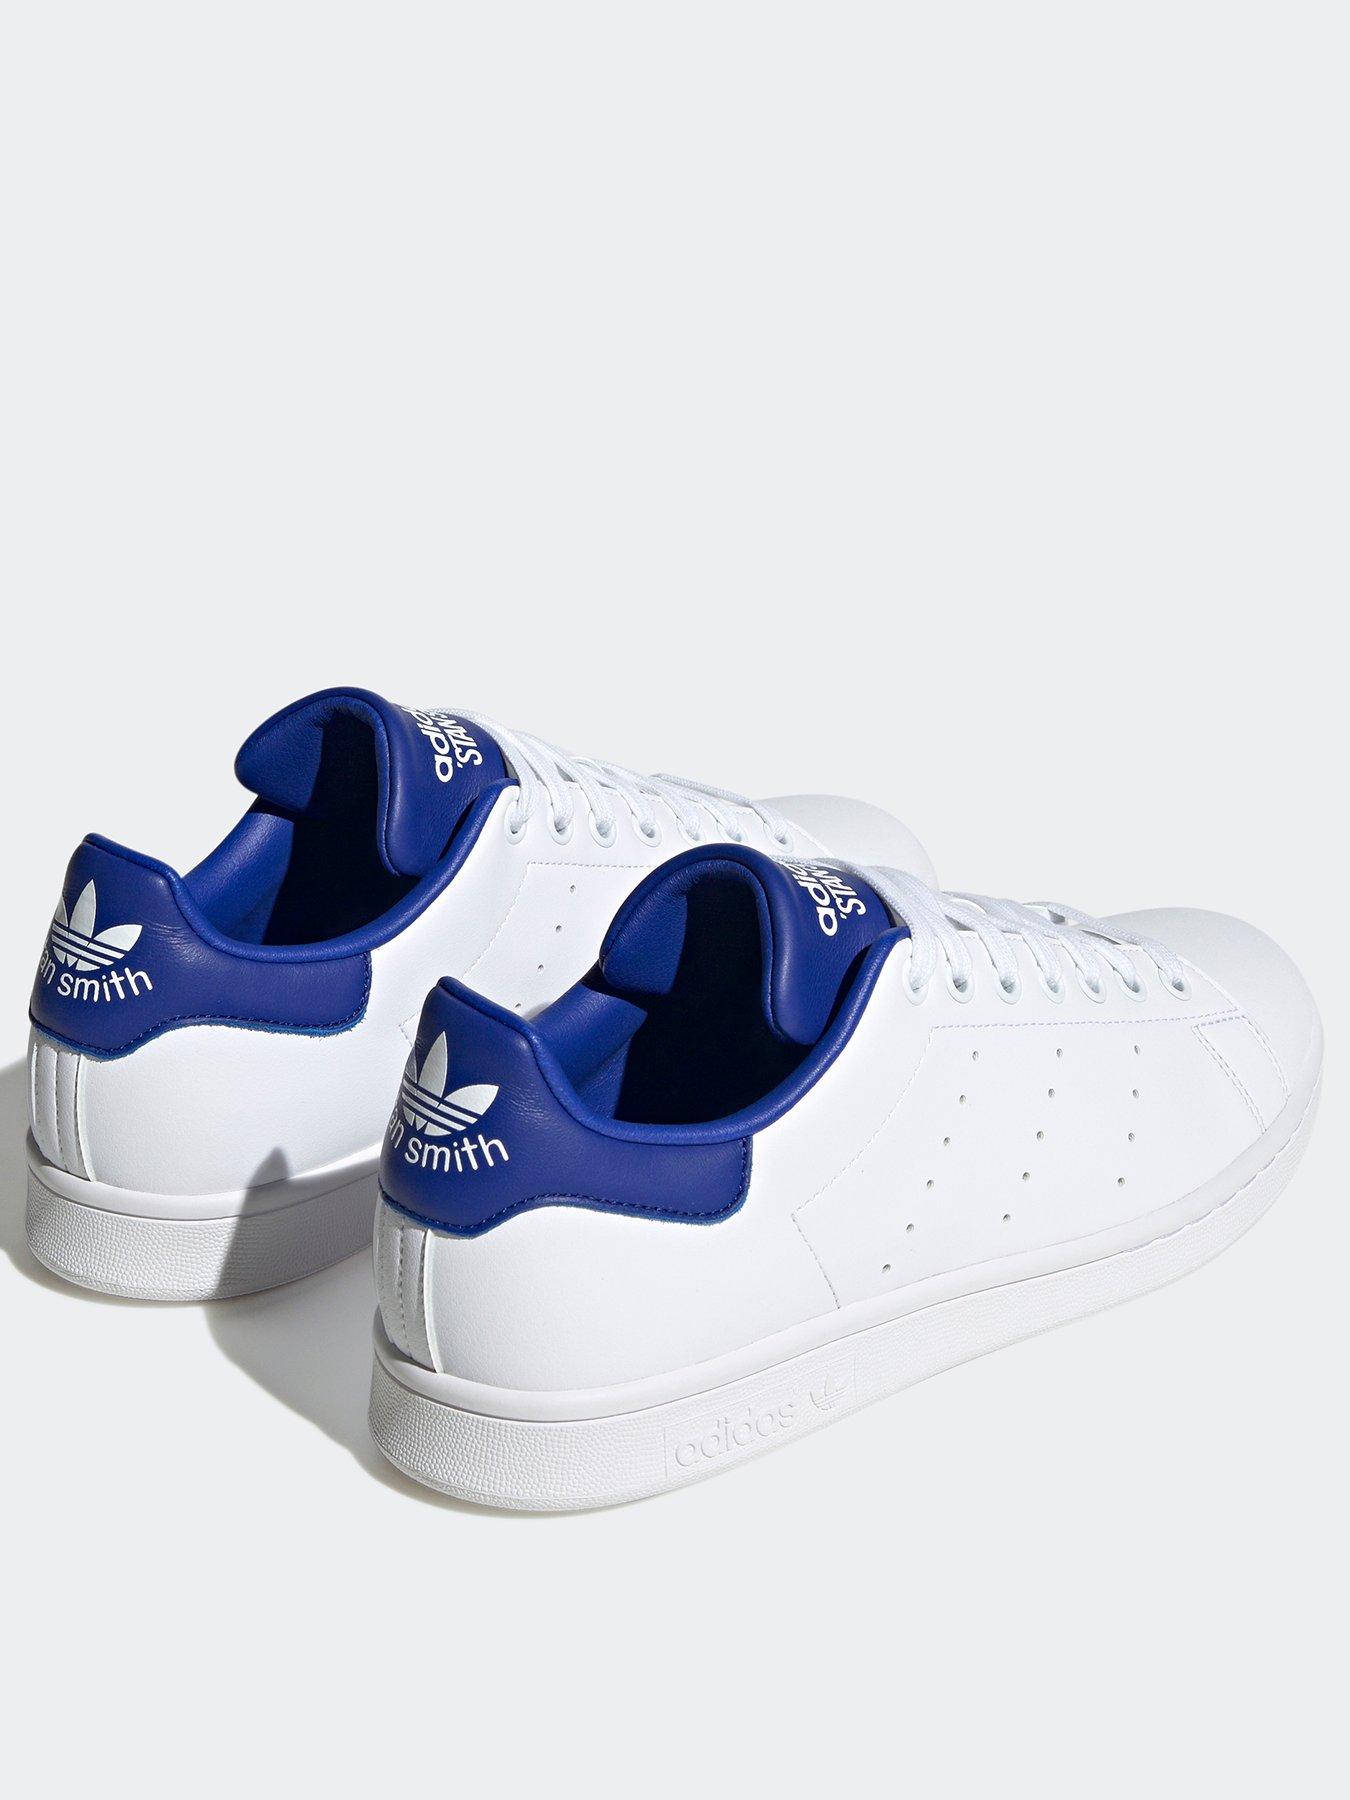 Iconic Versatility. The adidas Stan Smith. From sunlight to